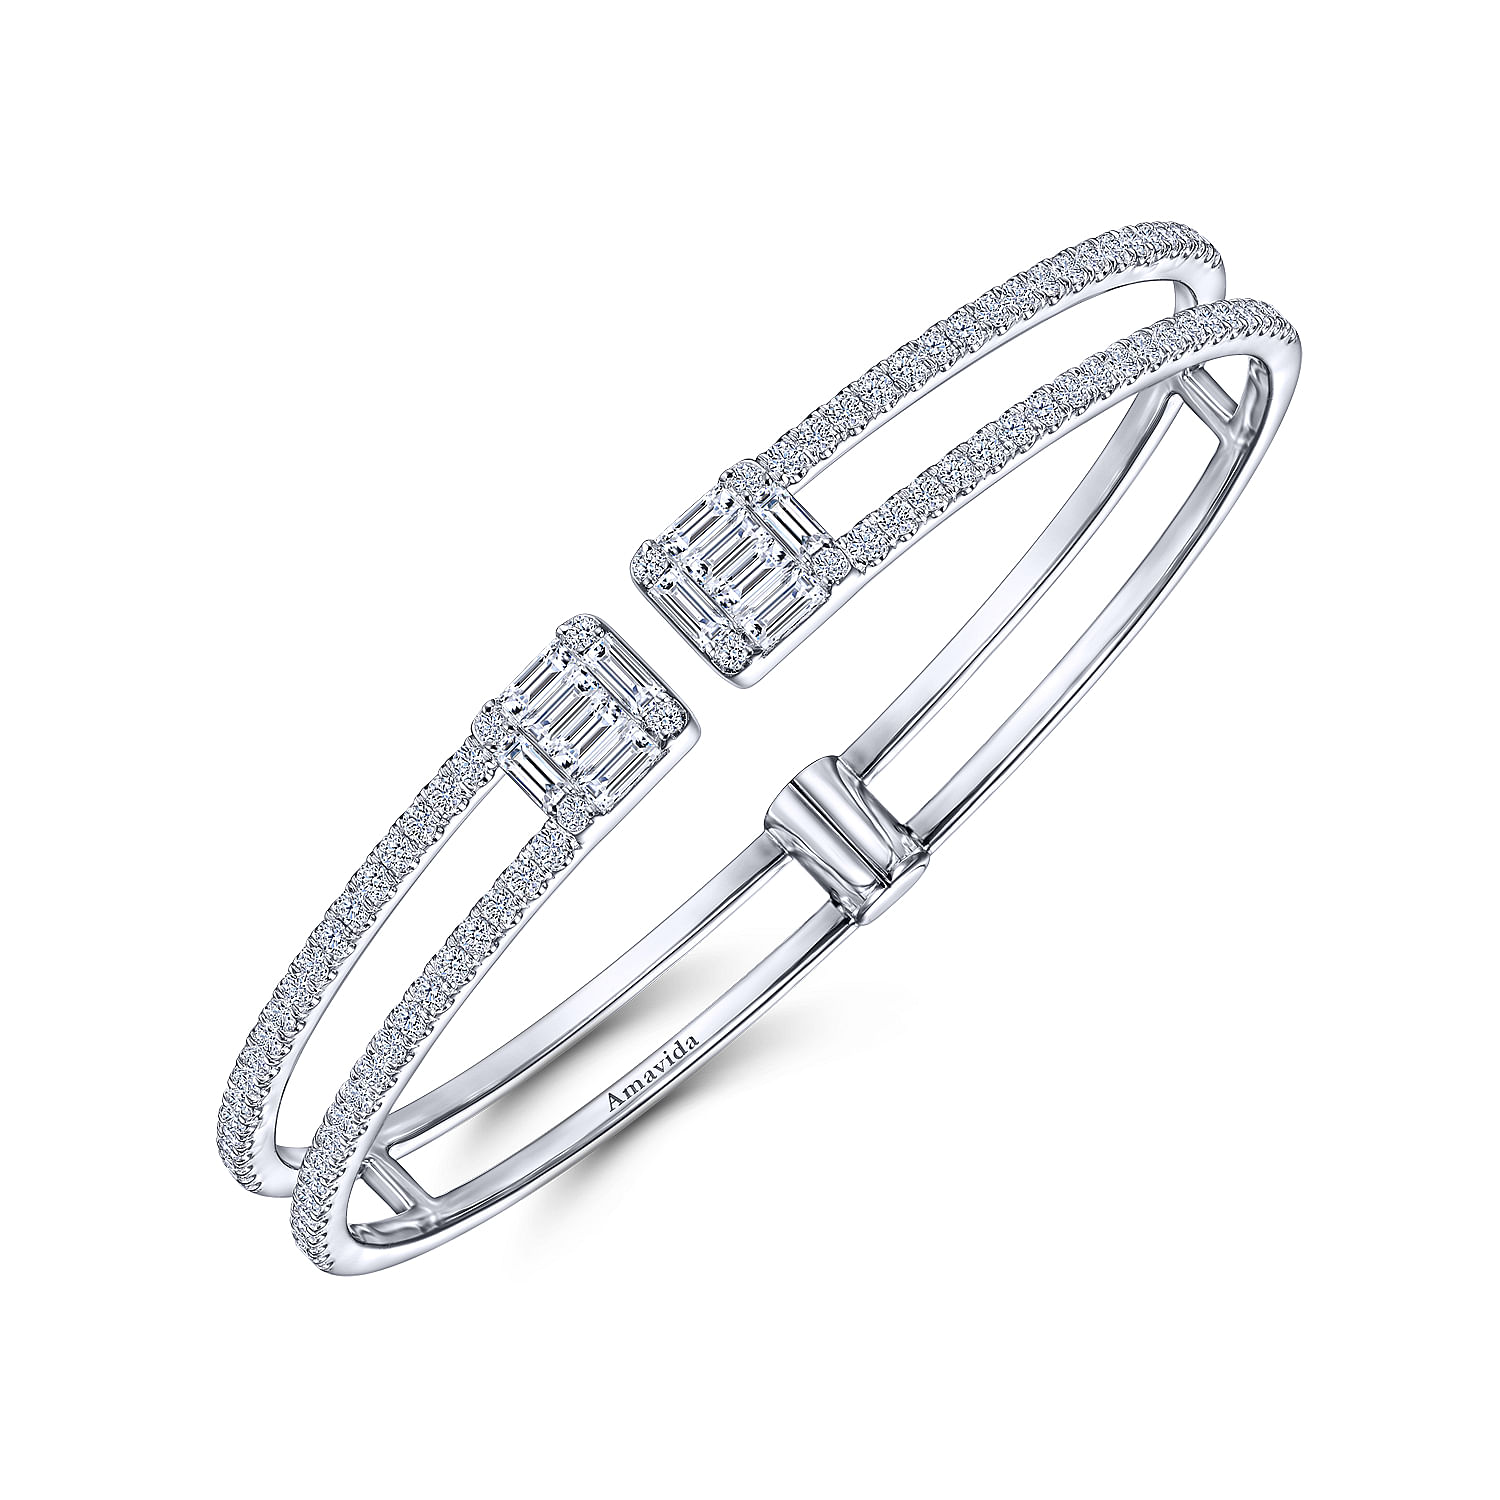 18K White Gold Open Cuff Bracelet with Baguette and Round Diamonds